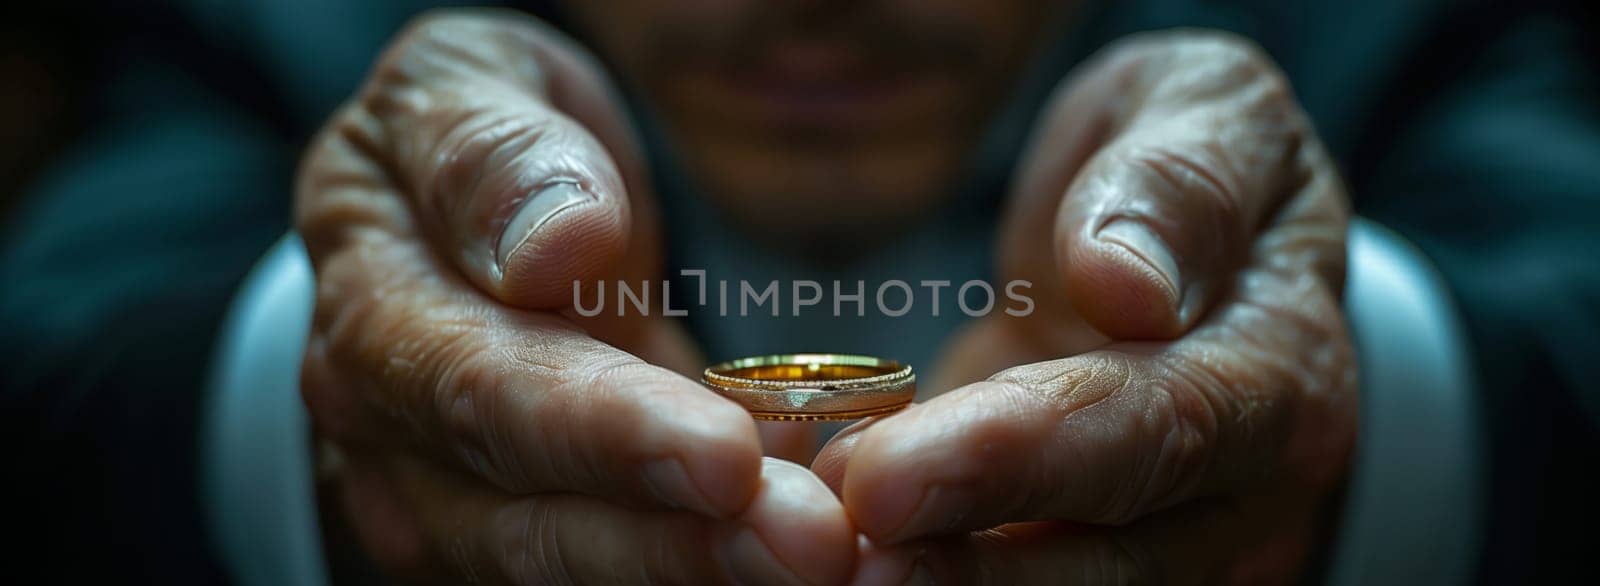 The man tenderly holds the wedding ring between his thumb and finger, close to his chest, a meaningful gesture symbolizing love and commitment for the upcoming event